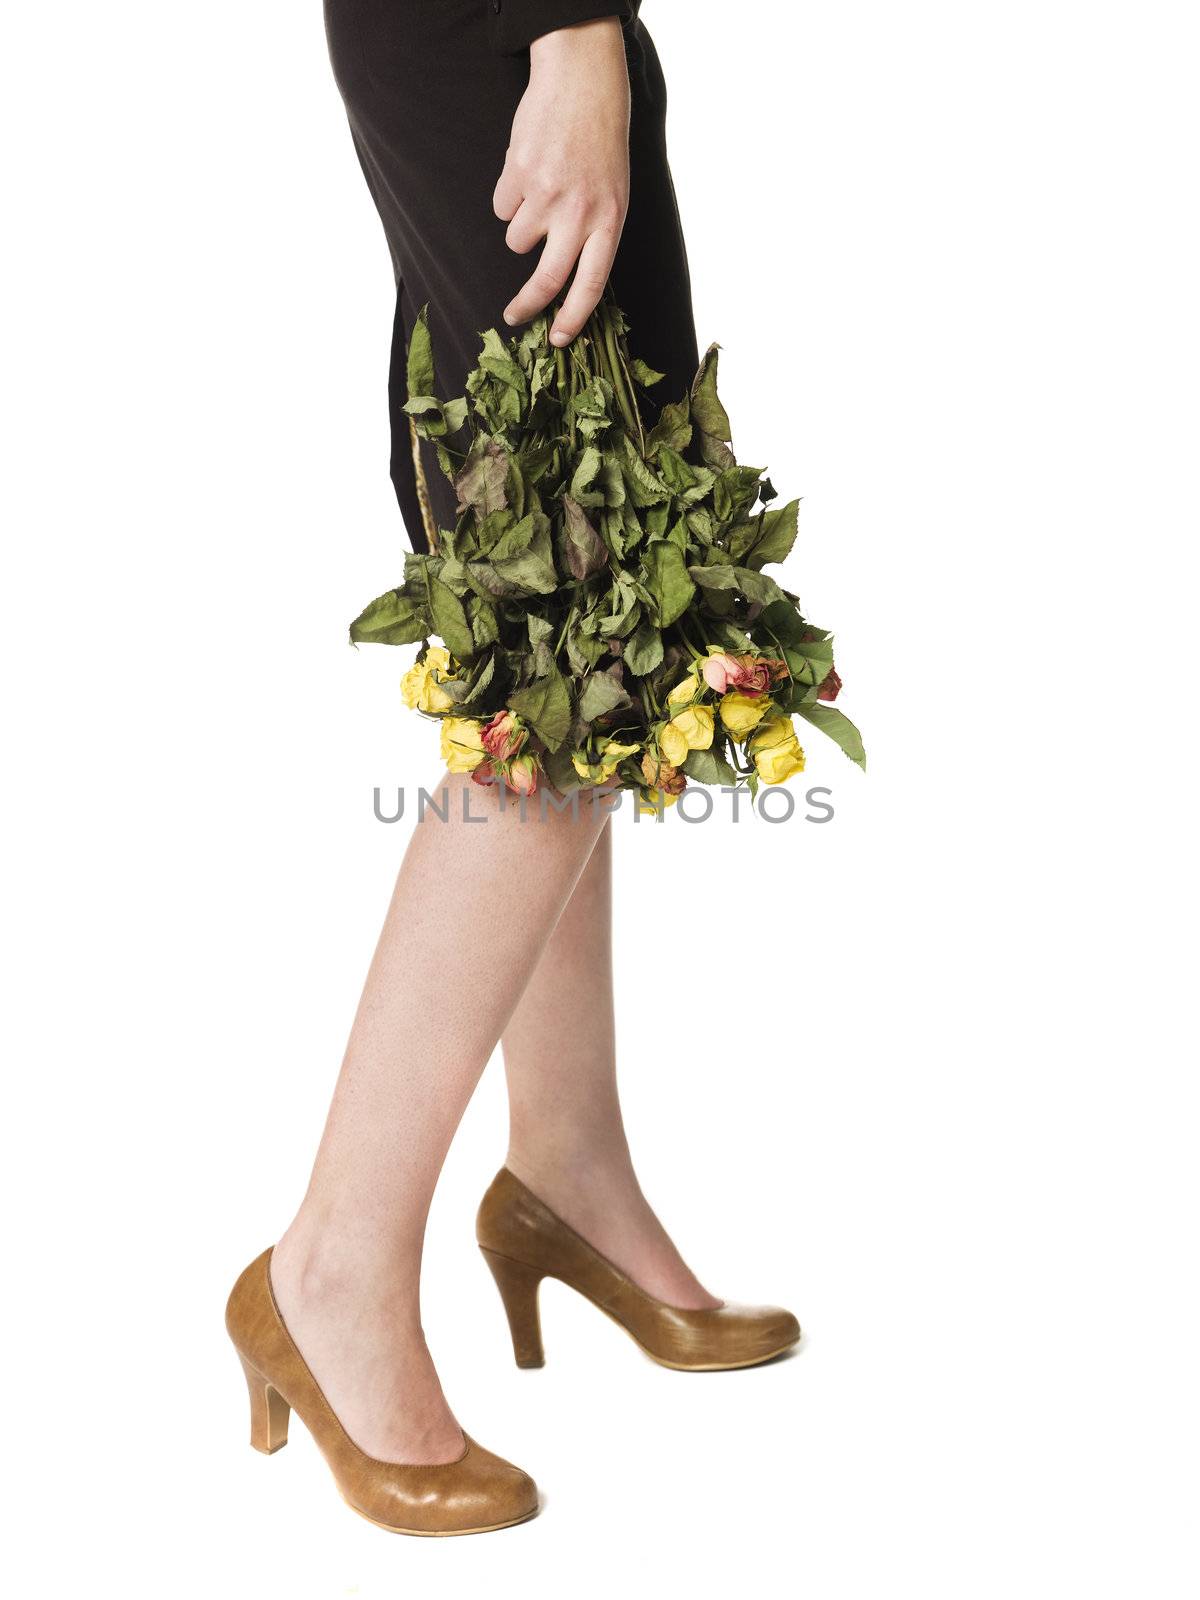 Woman holding a bunch of dead flowers by gemenacom